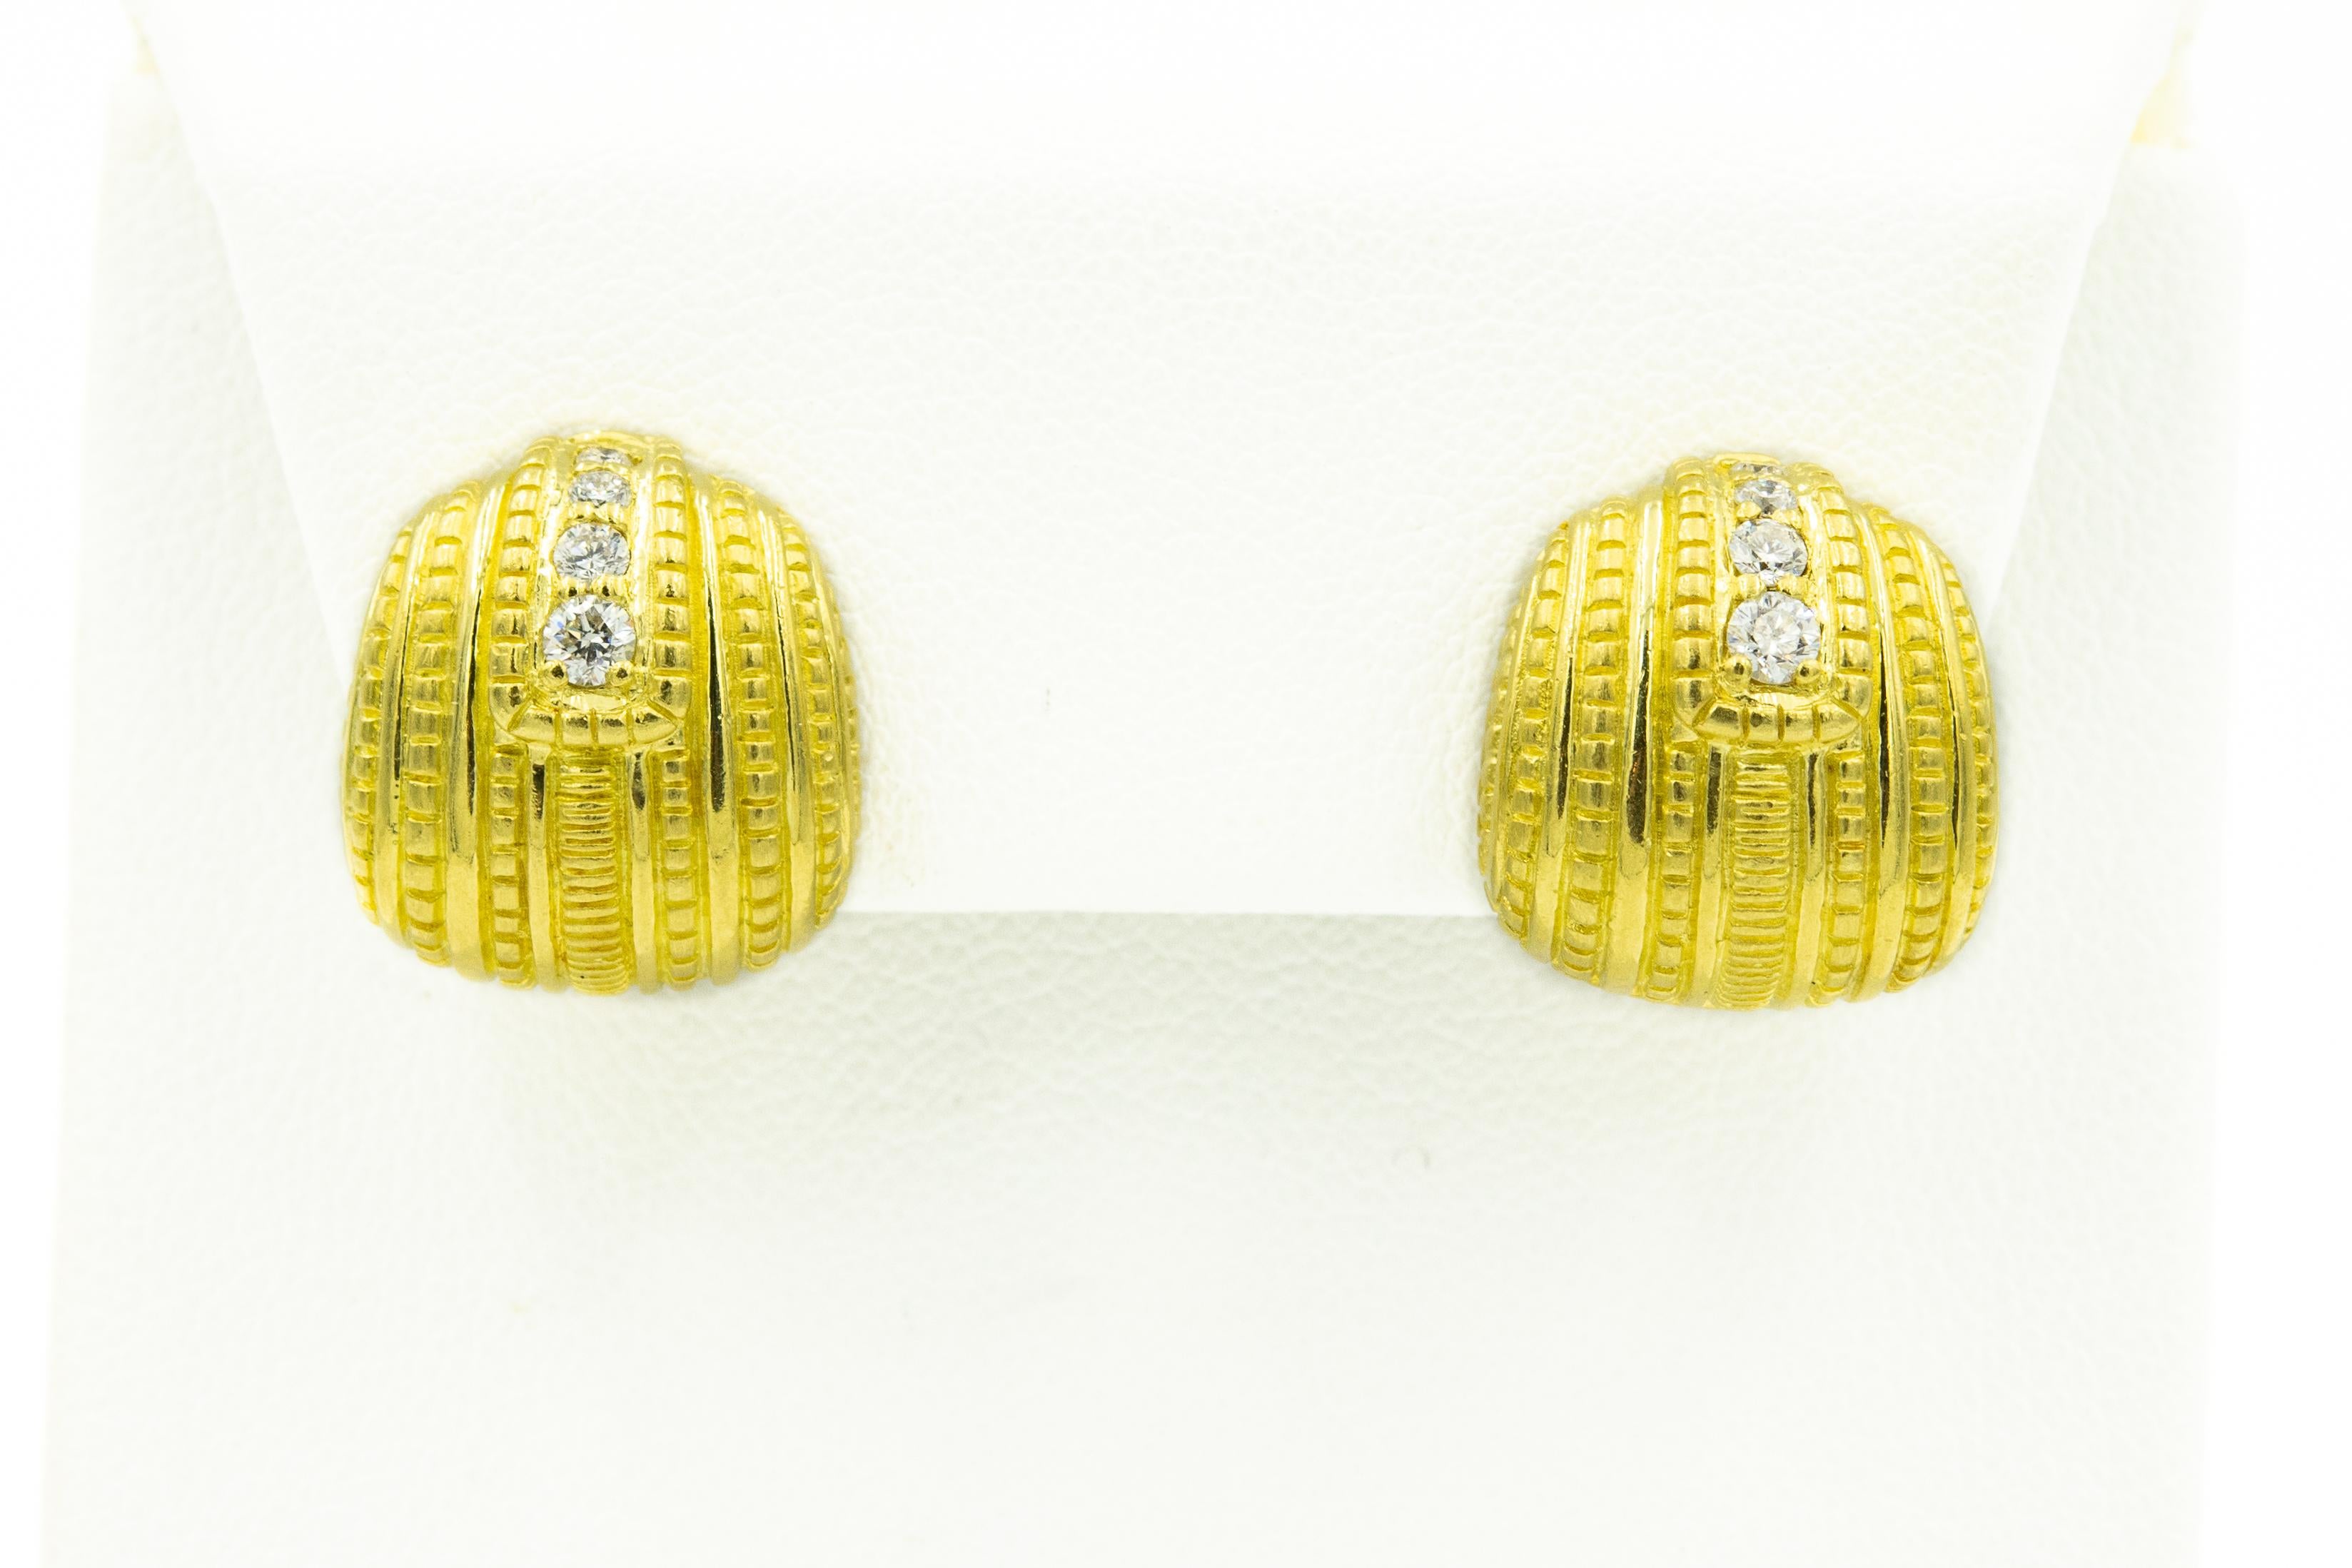 18K yellow gold Judith Ripka sculpted stud earrings featuring 4 graduated carats round brilliant diamonds accenting each earring and post lever back closures.

Marked 18k JR and hallmarked.
